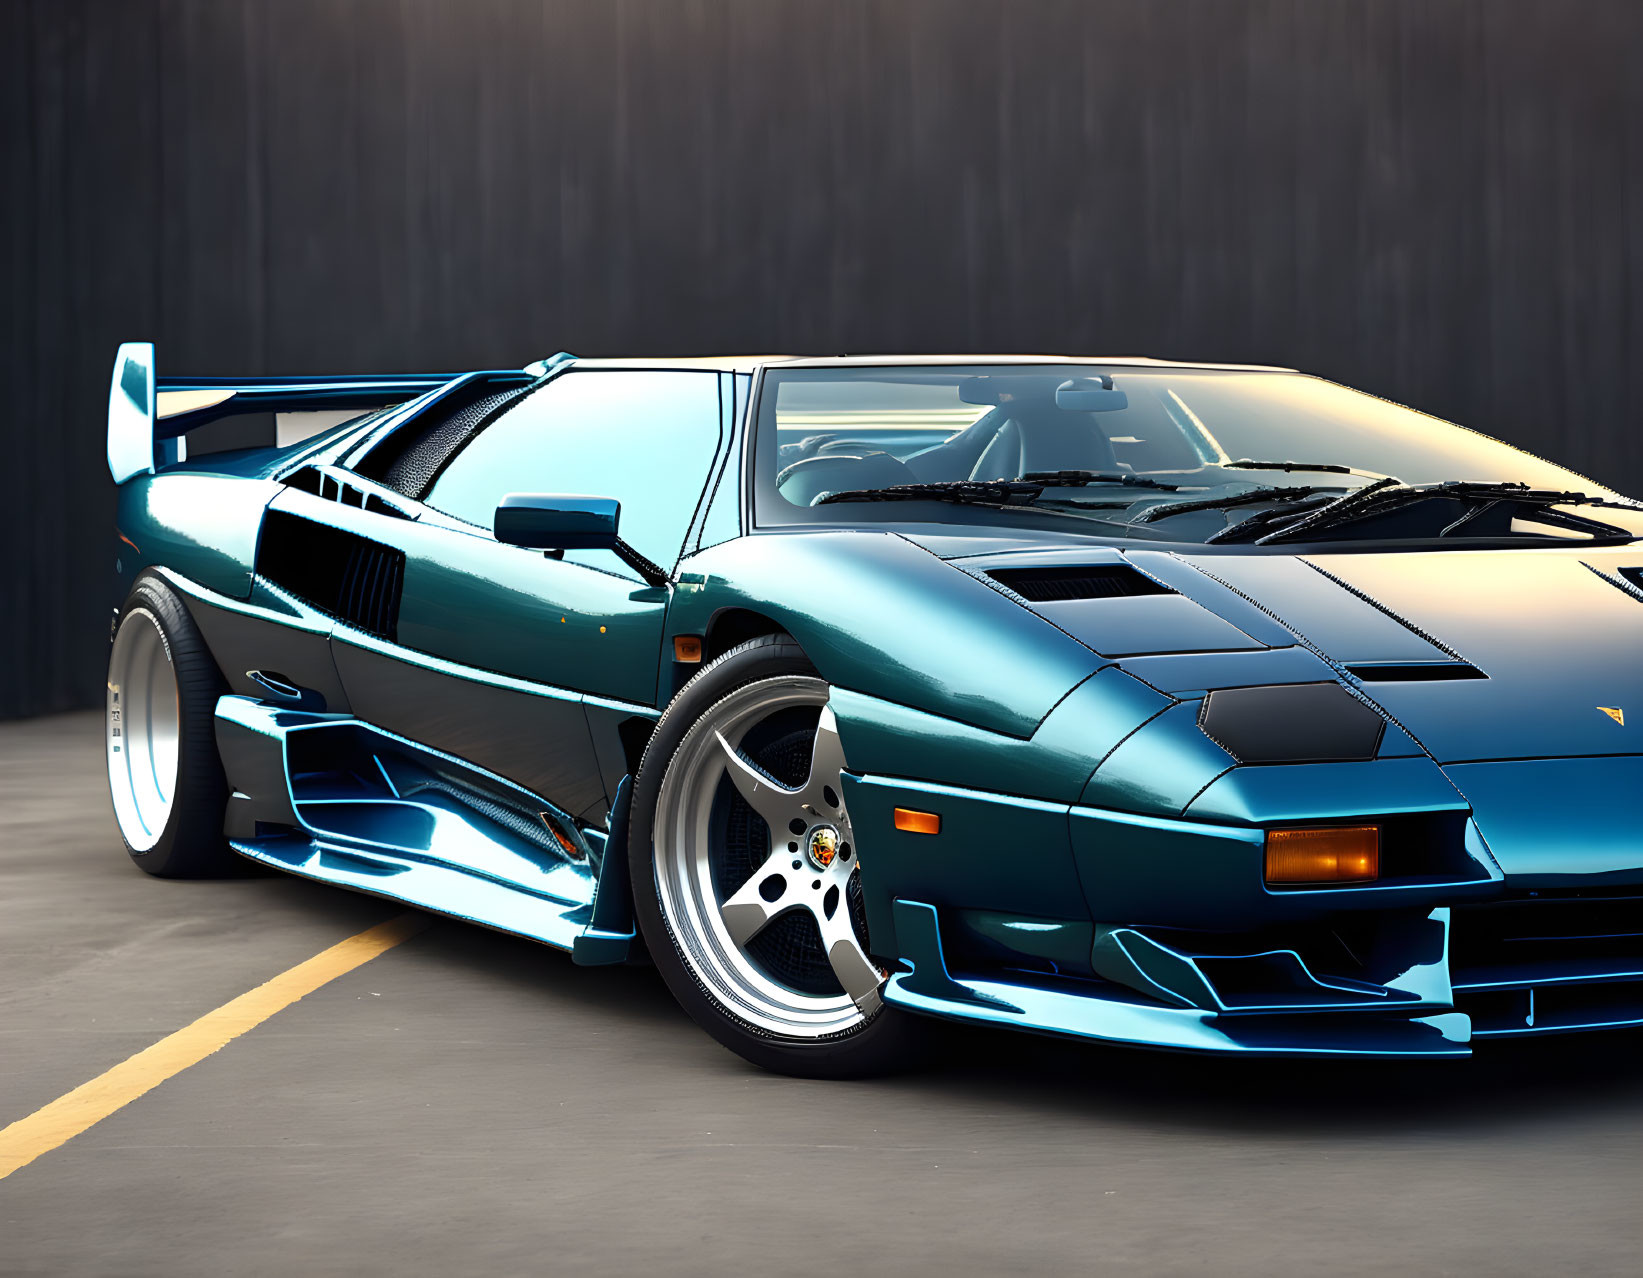 Teal Lamborghini Countach with large rear wing in grey backdrop